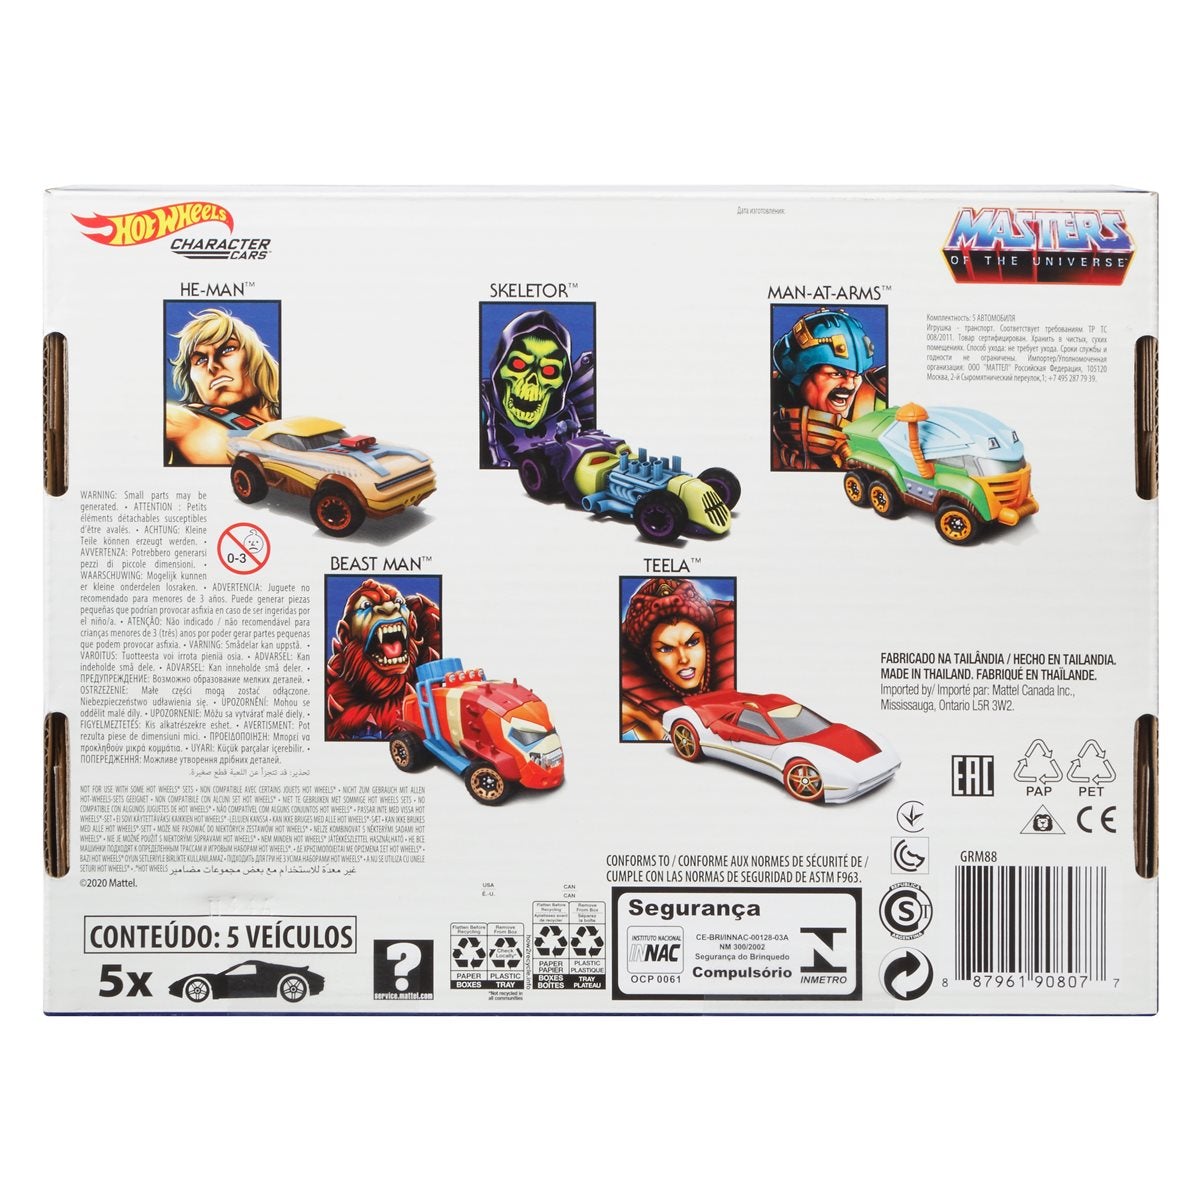 Hot Wheels: Masters of the Universe - Character Car 5-Pack -